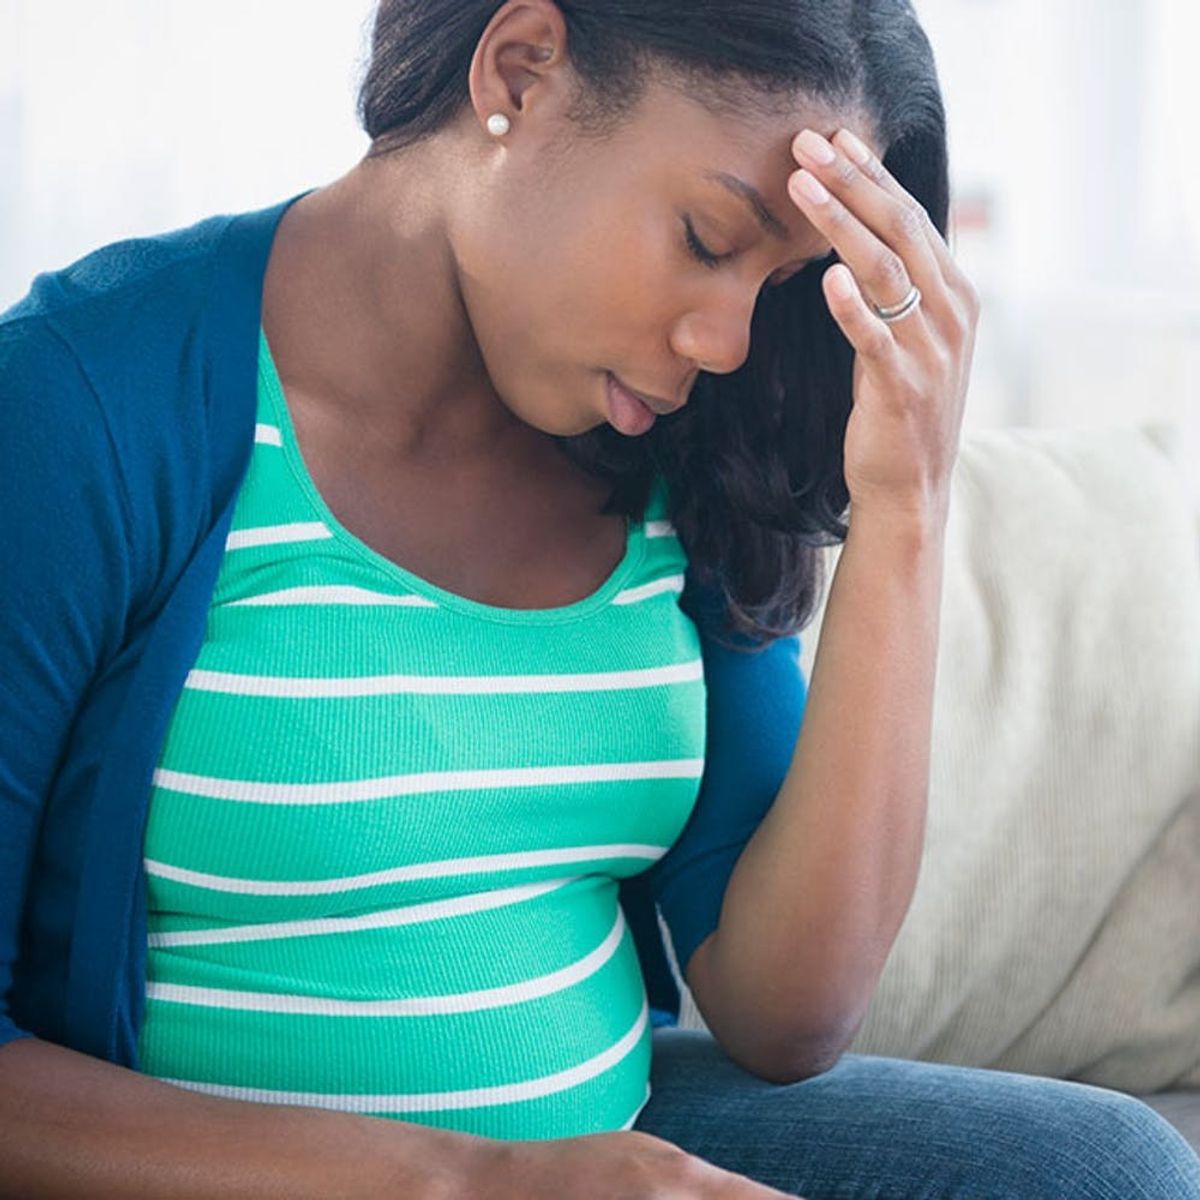 How to Deal With Unsolicited (and Unwanted) In-Law Advice When You’re Pregnant